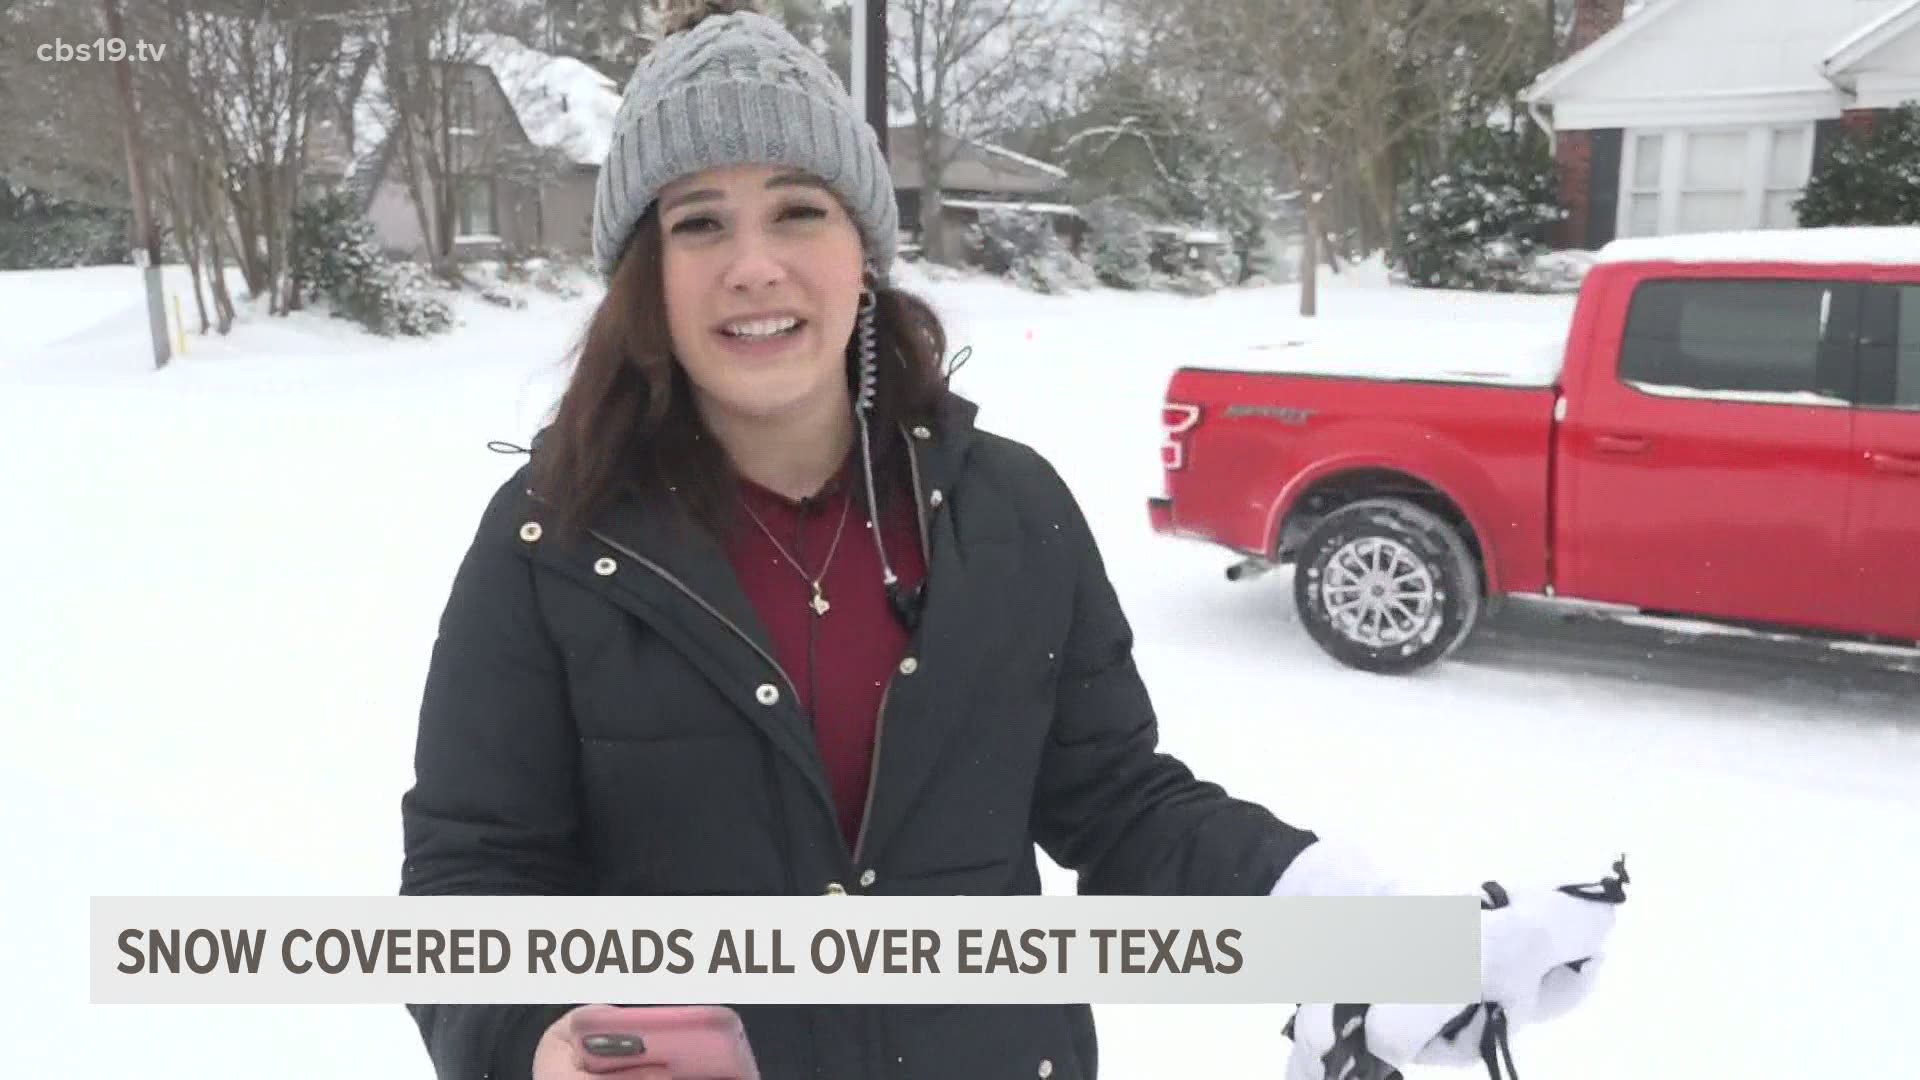 Snow-covered roads all over East Texas